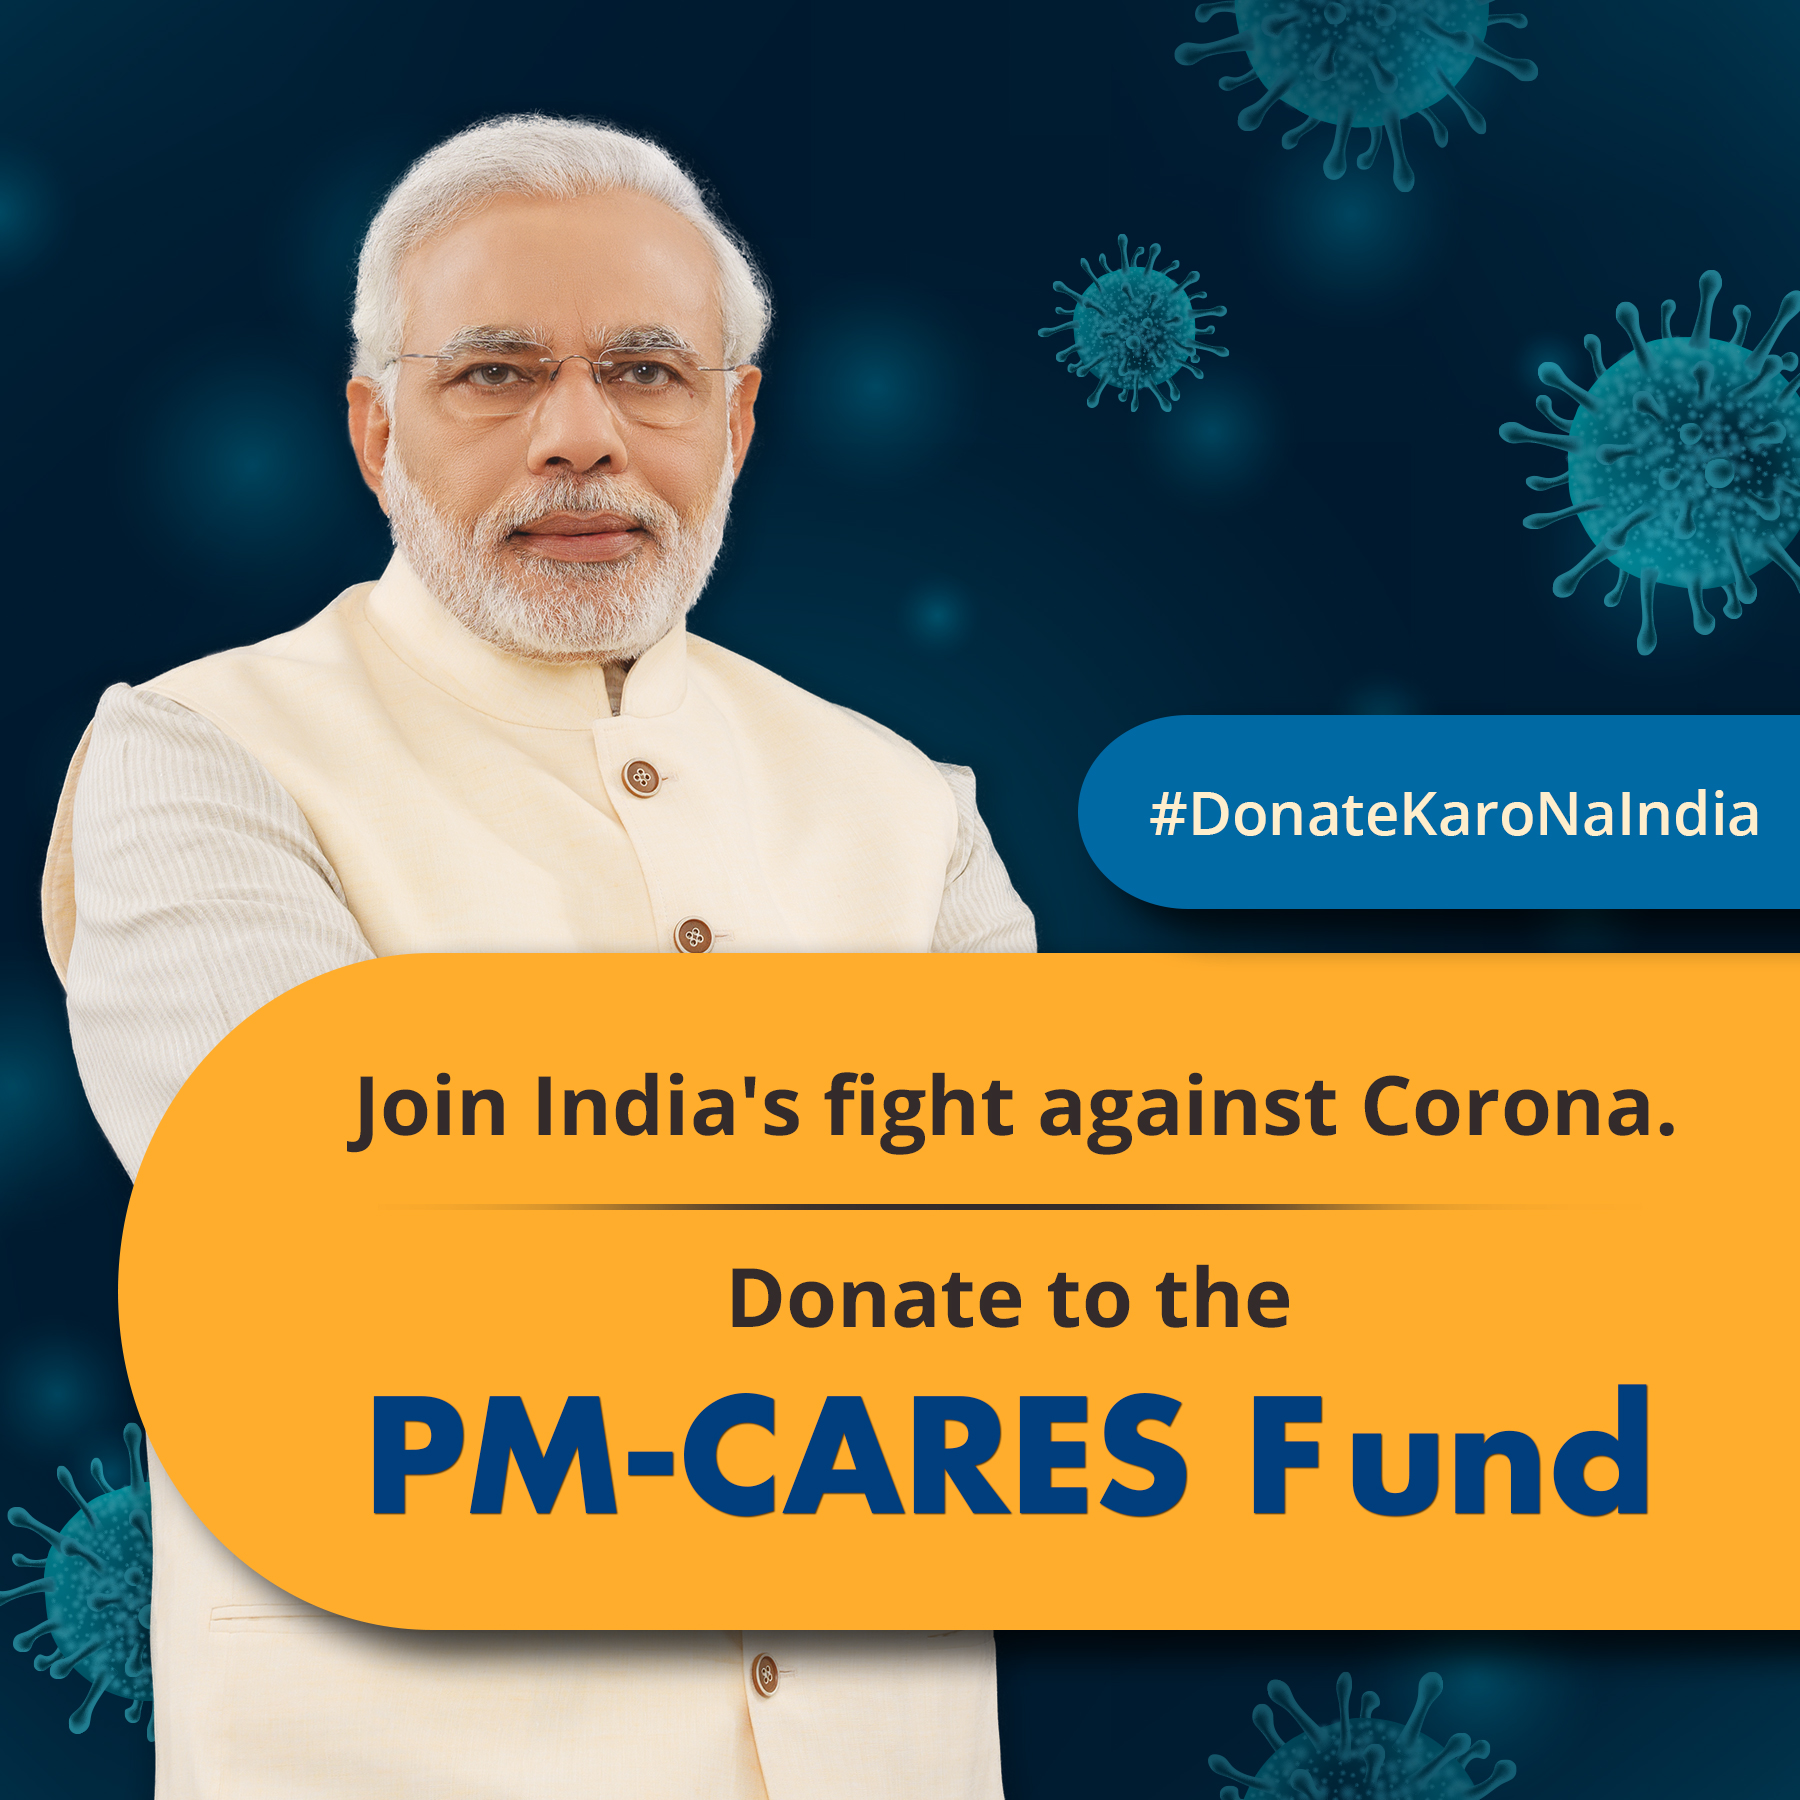 Donate to Help India Fight Covid-19 at PM-CARES Fund